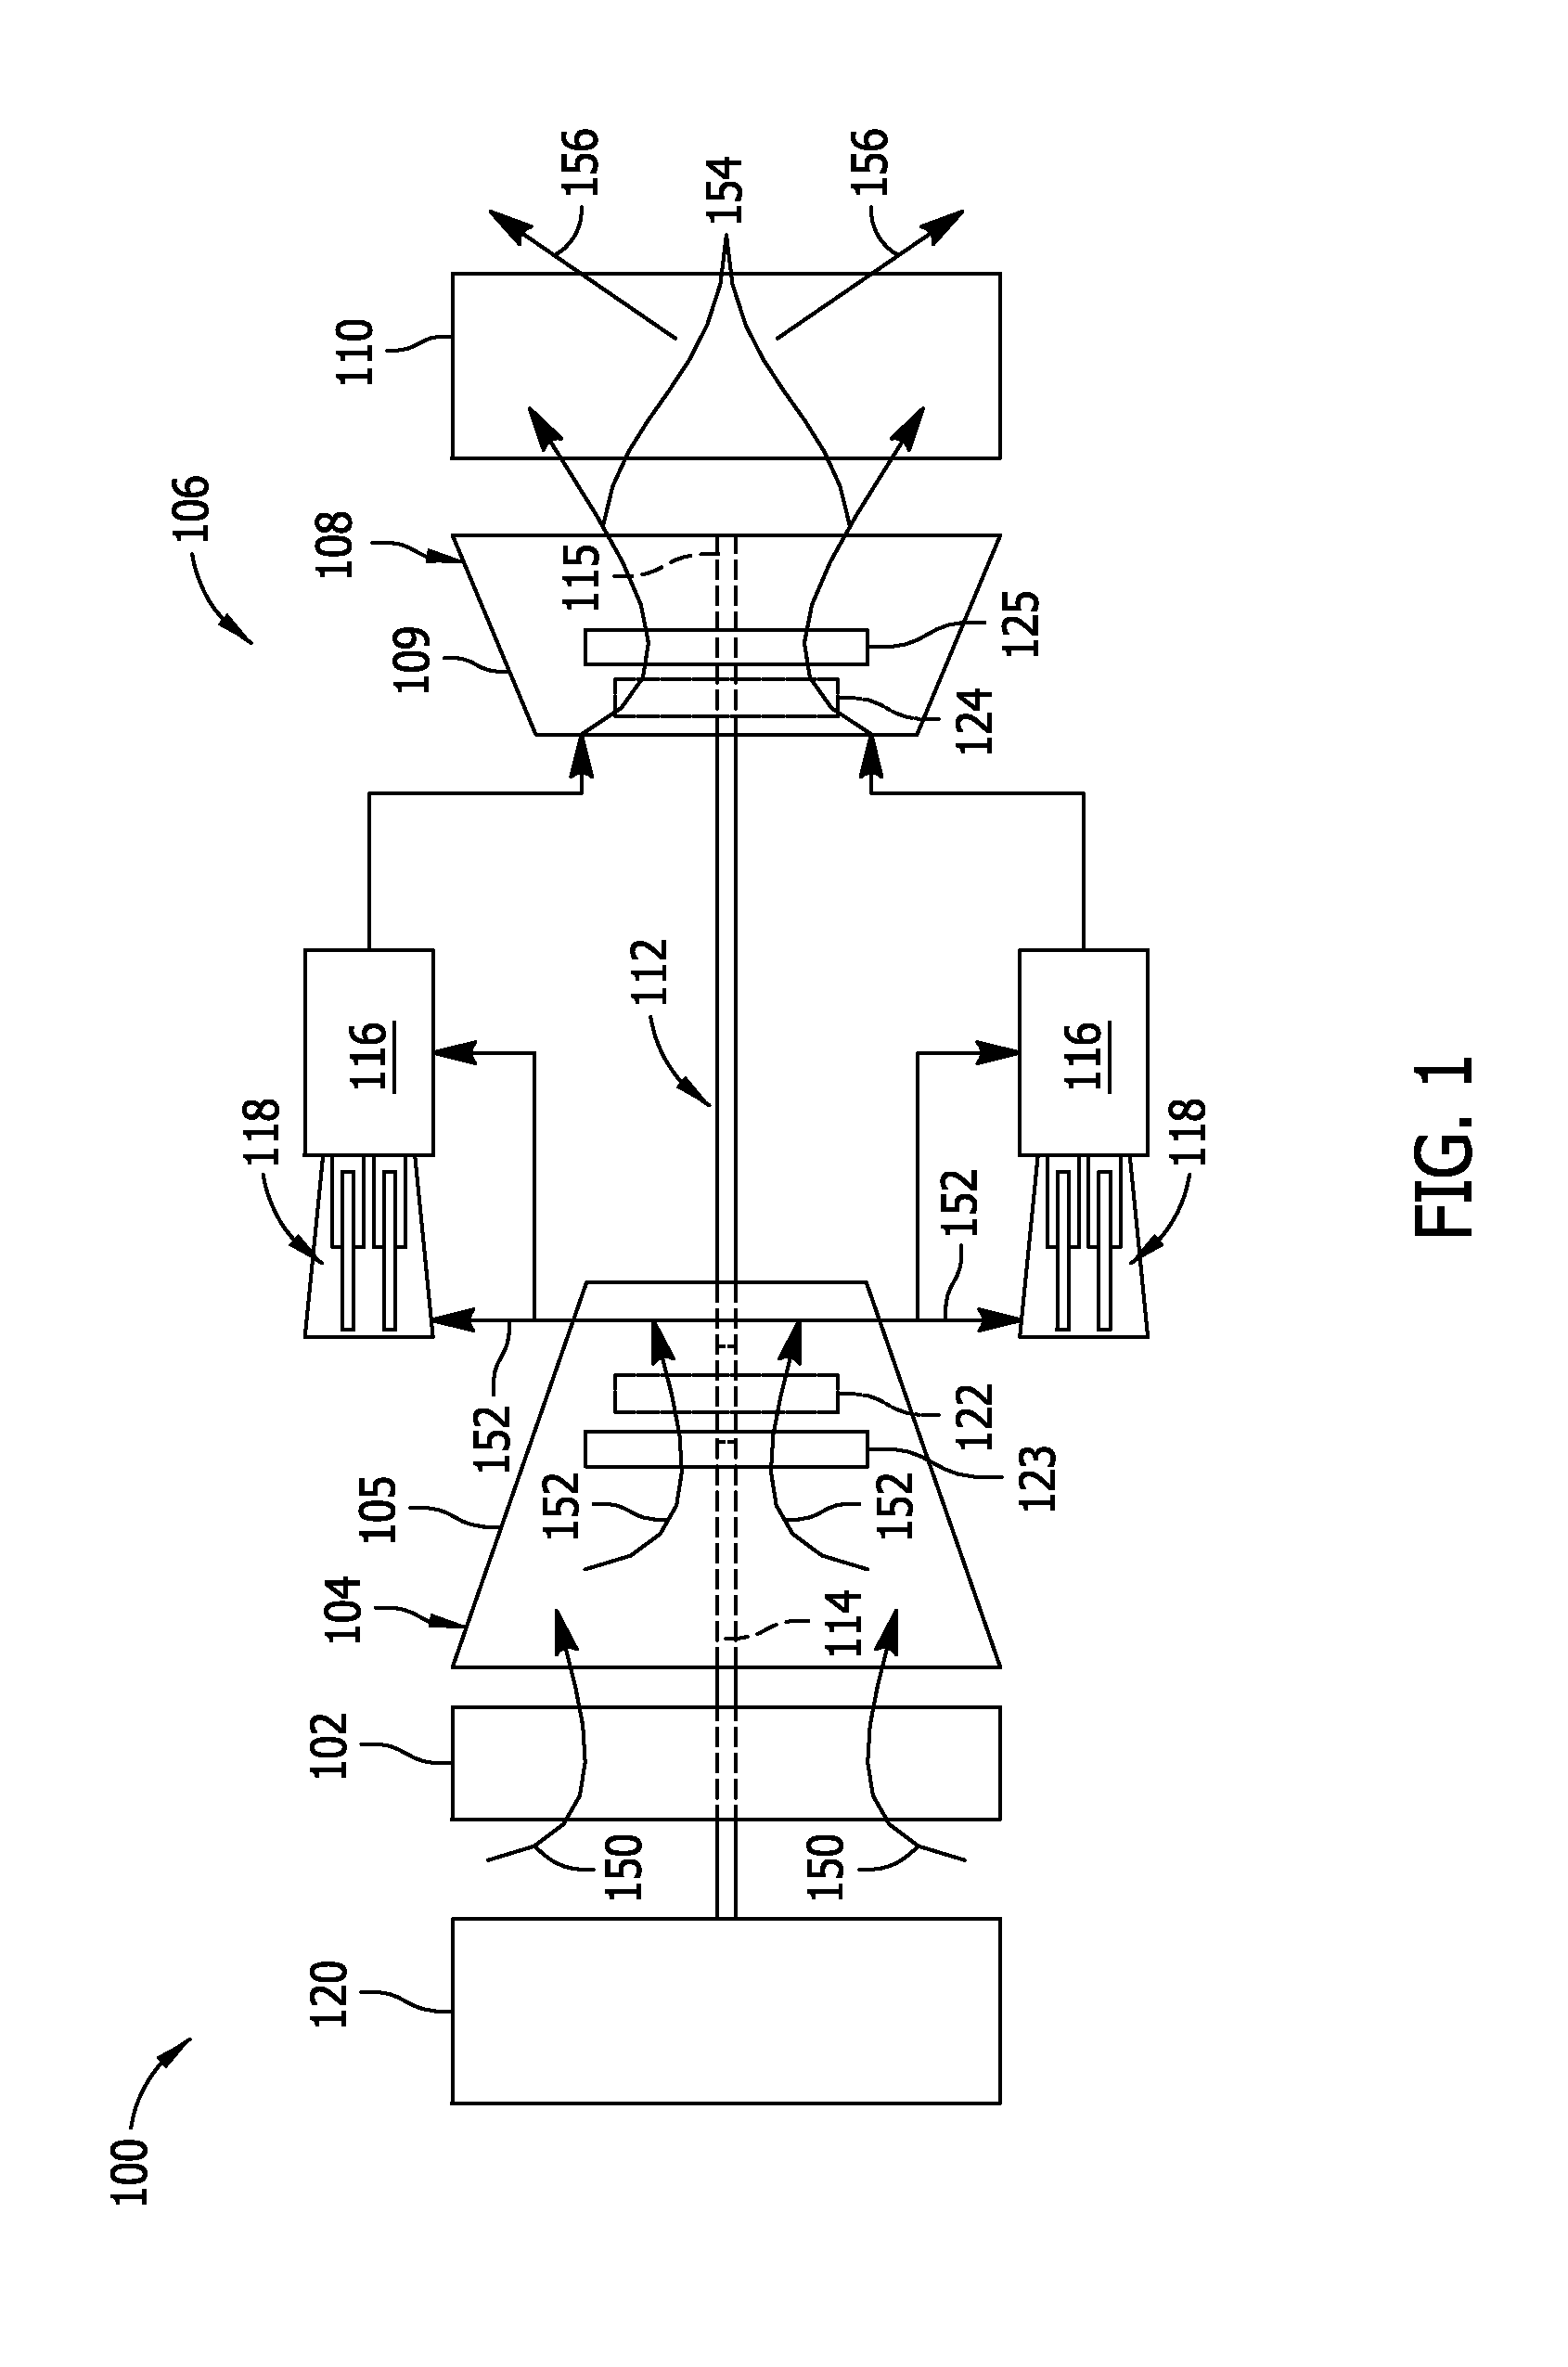 Creep life management system for a turbine engine and method of operating the same